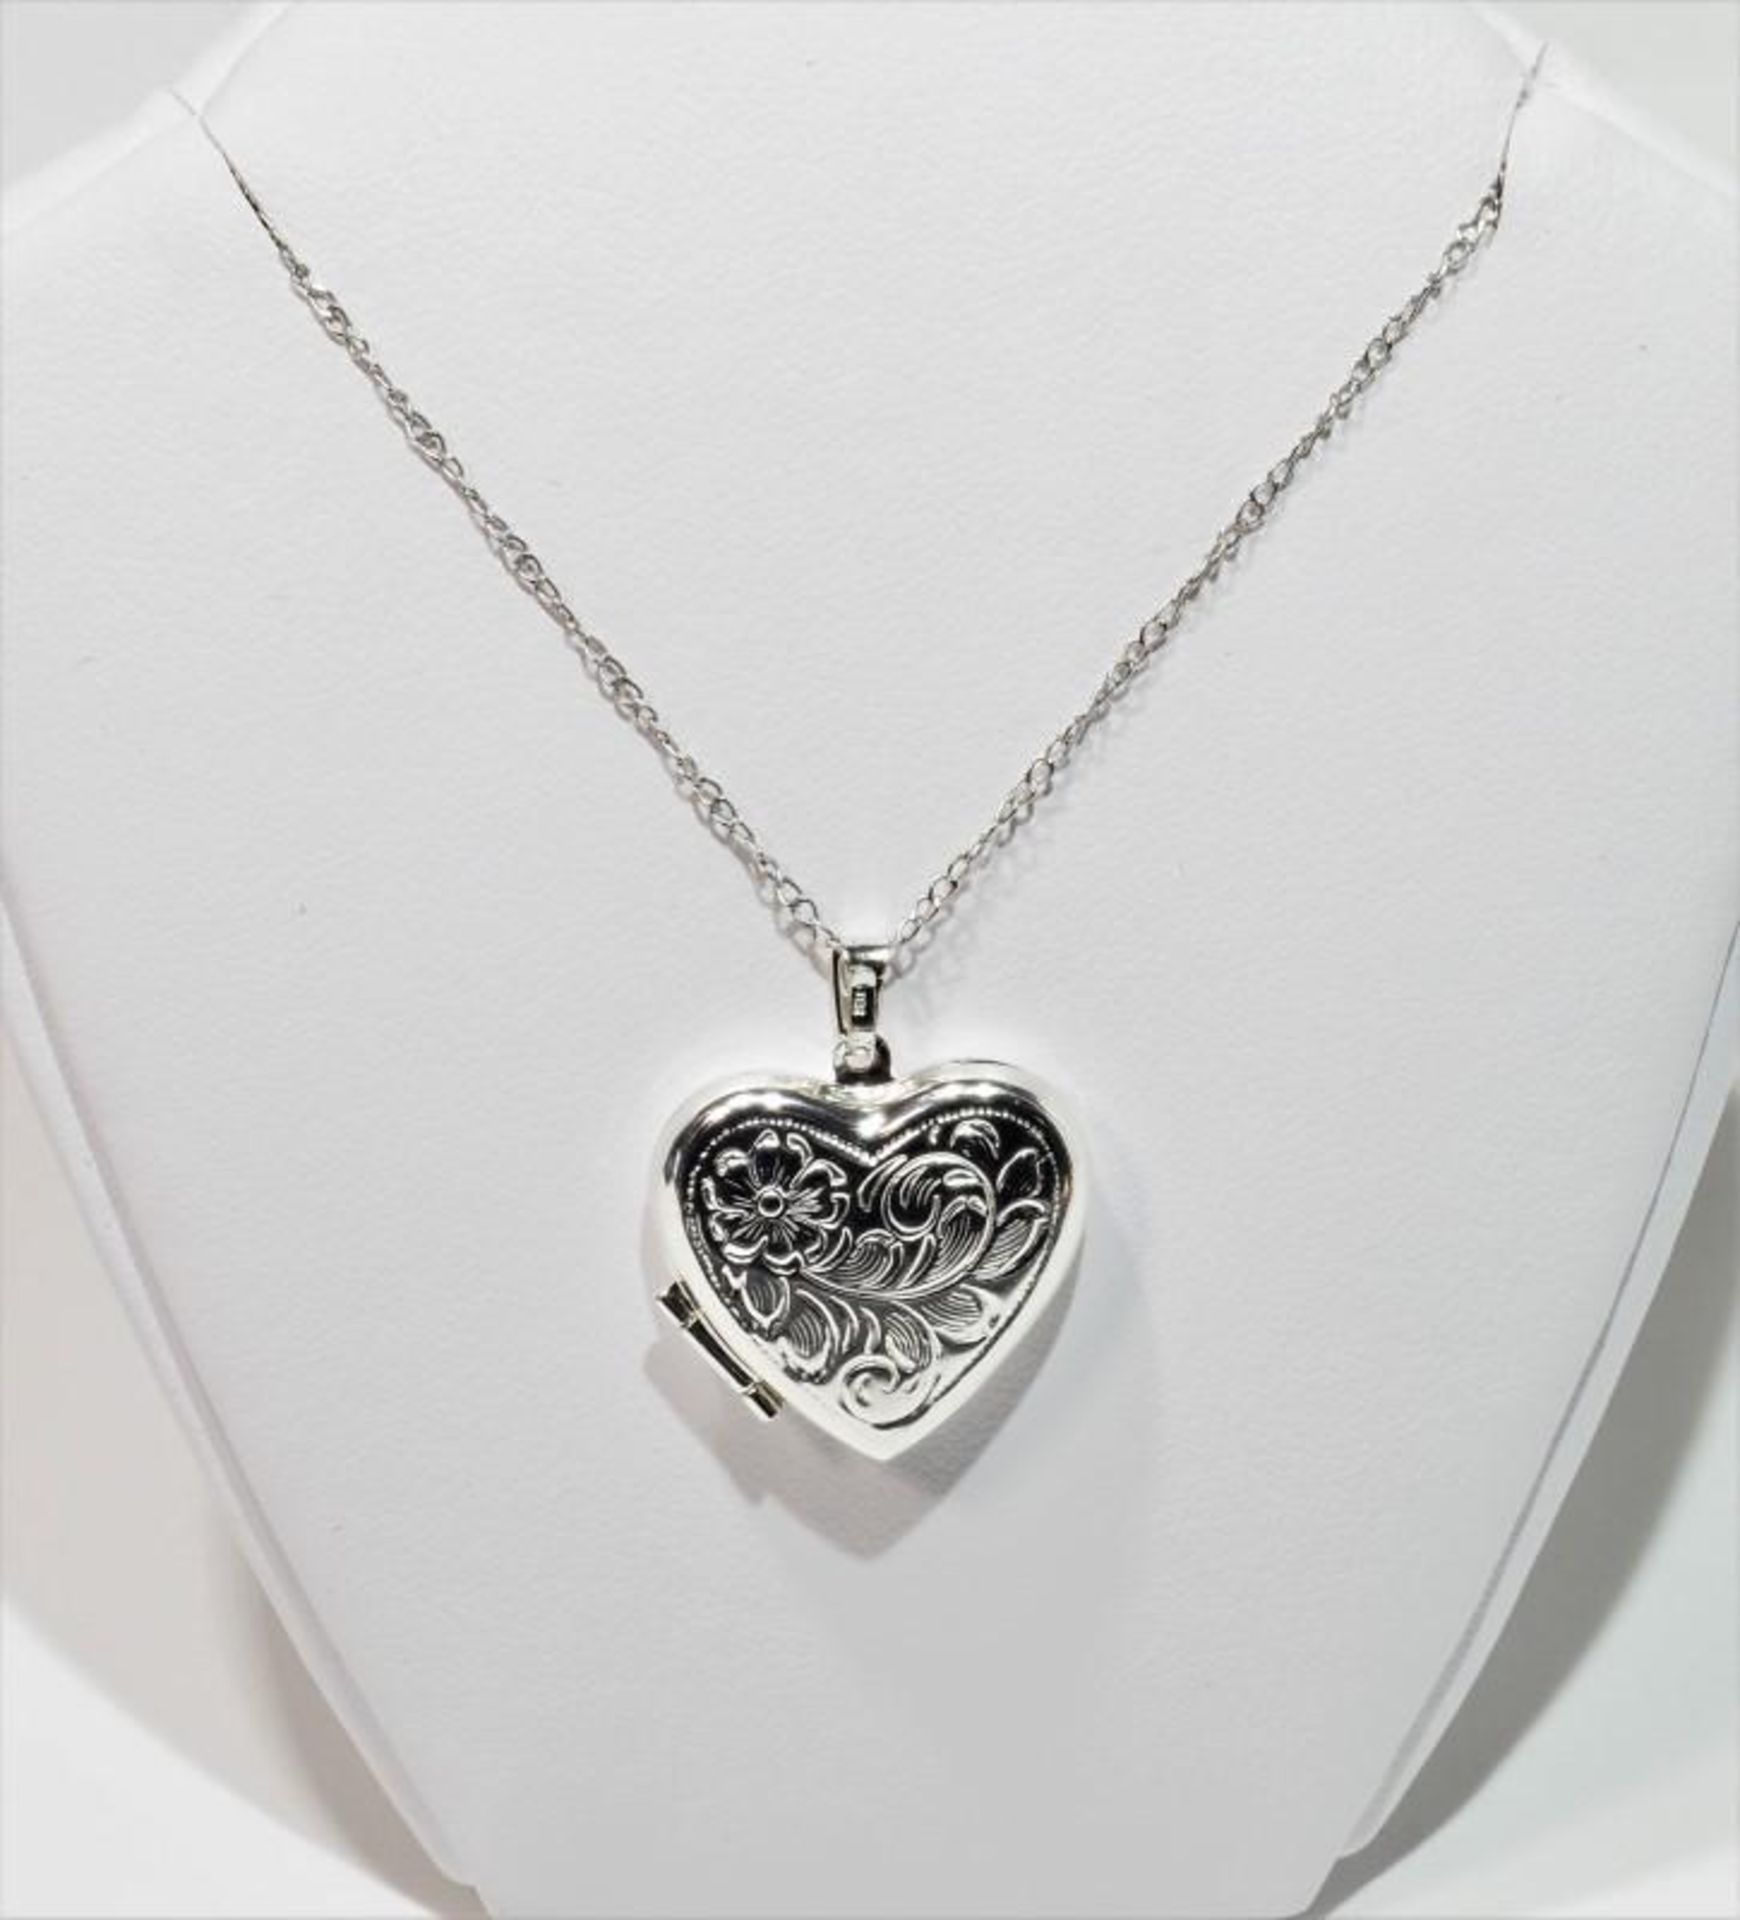 Sterling Silver Necklace With Heart Shaped Locket Pendant, Retail $125 (MS19 - 3)